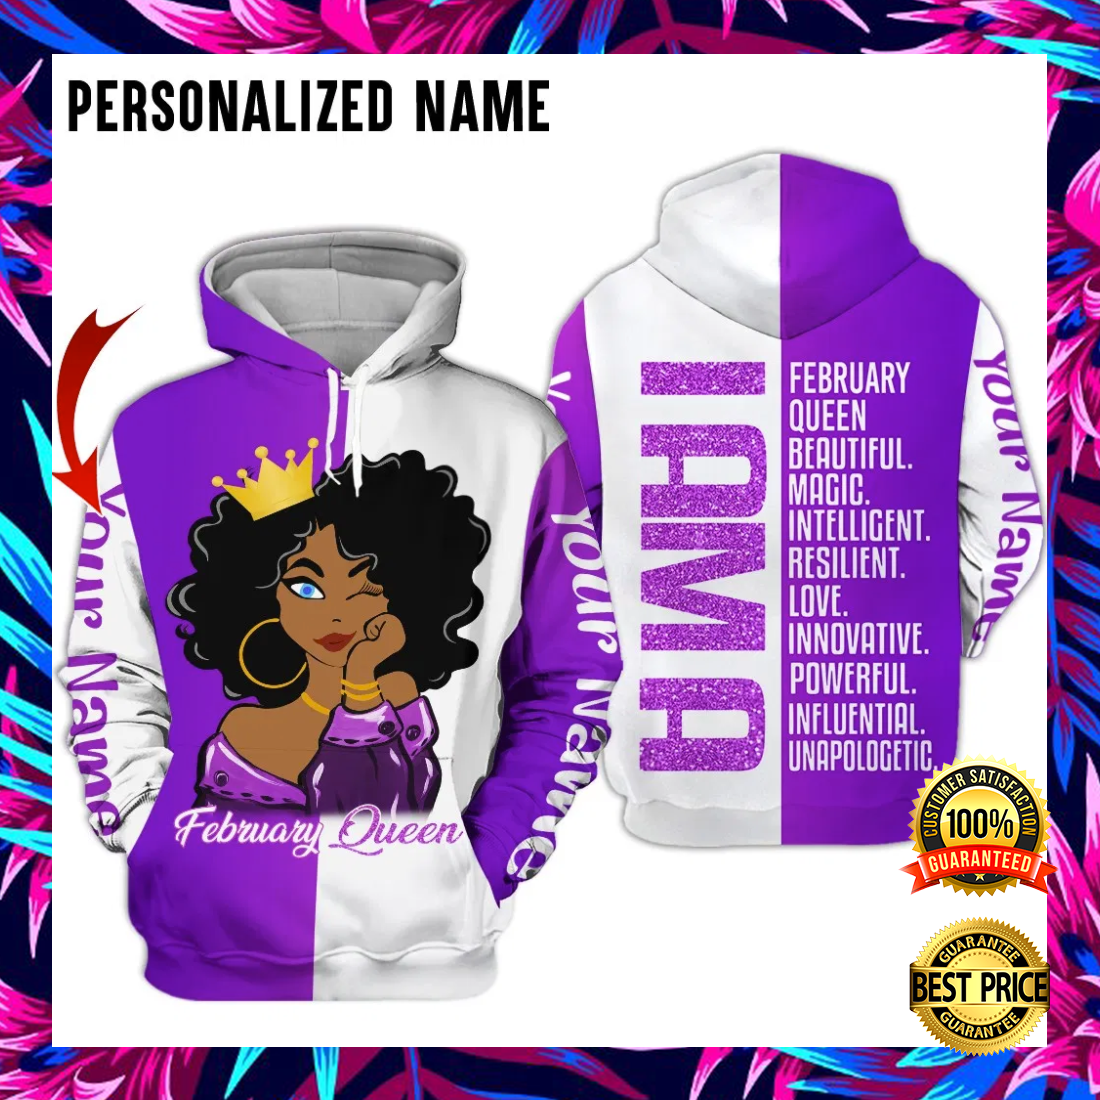 Personalized i am a february queen beautiful magic intelligent all over printed 3D hoodie